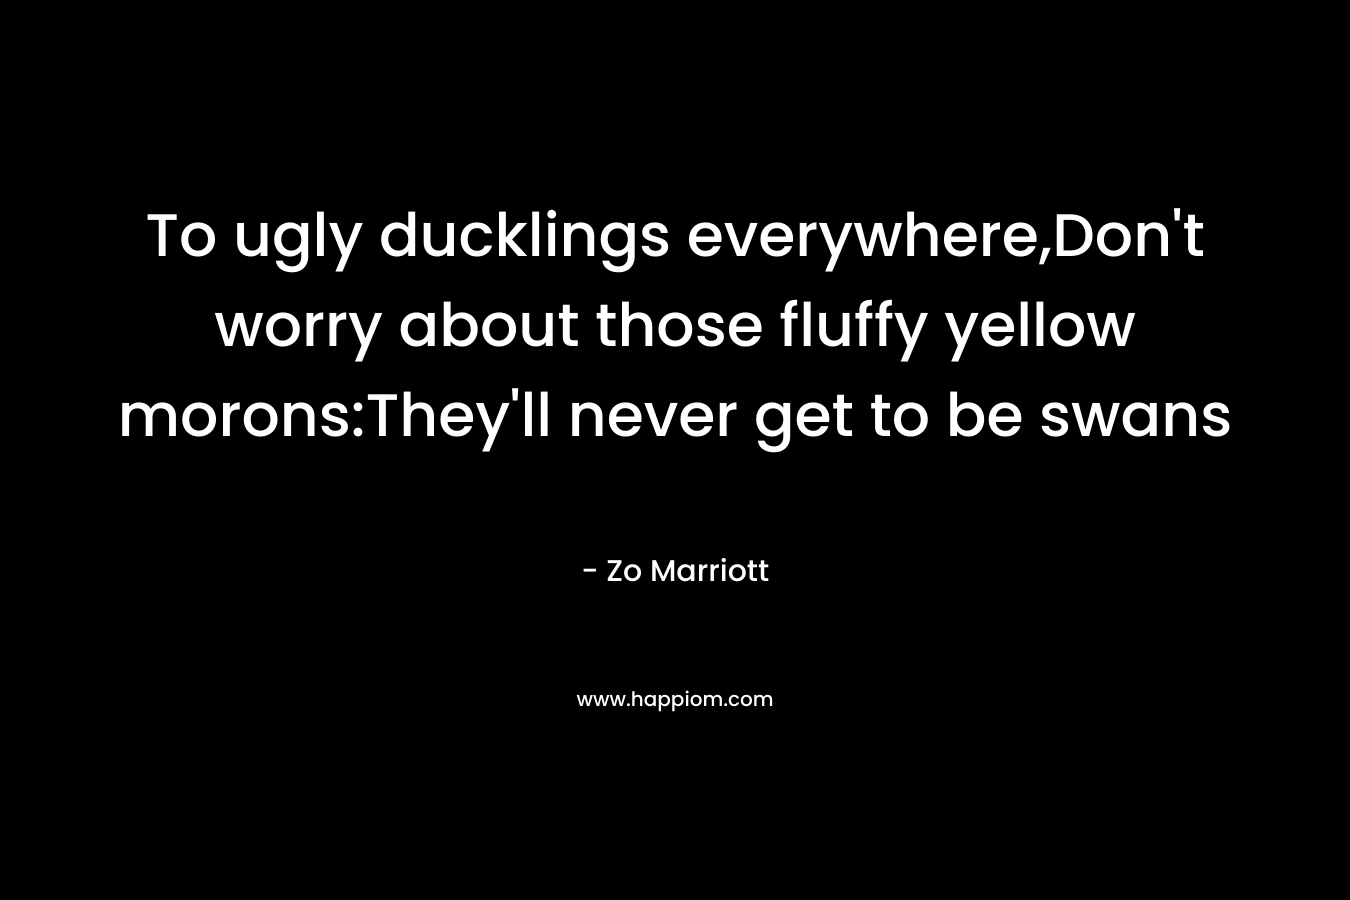 To ugly ducklings everywhere,Don't worry about those fluffy yellow morons:They'll never get to be swans